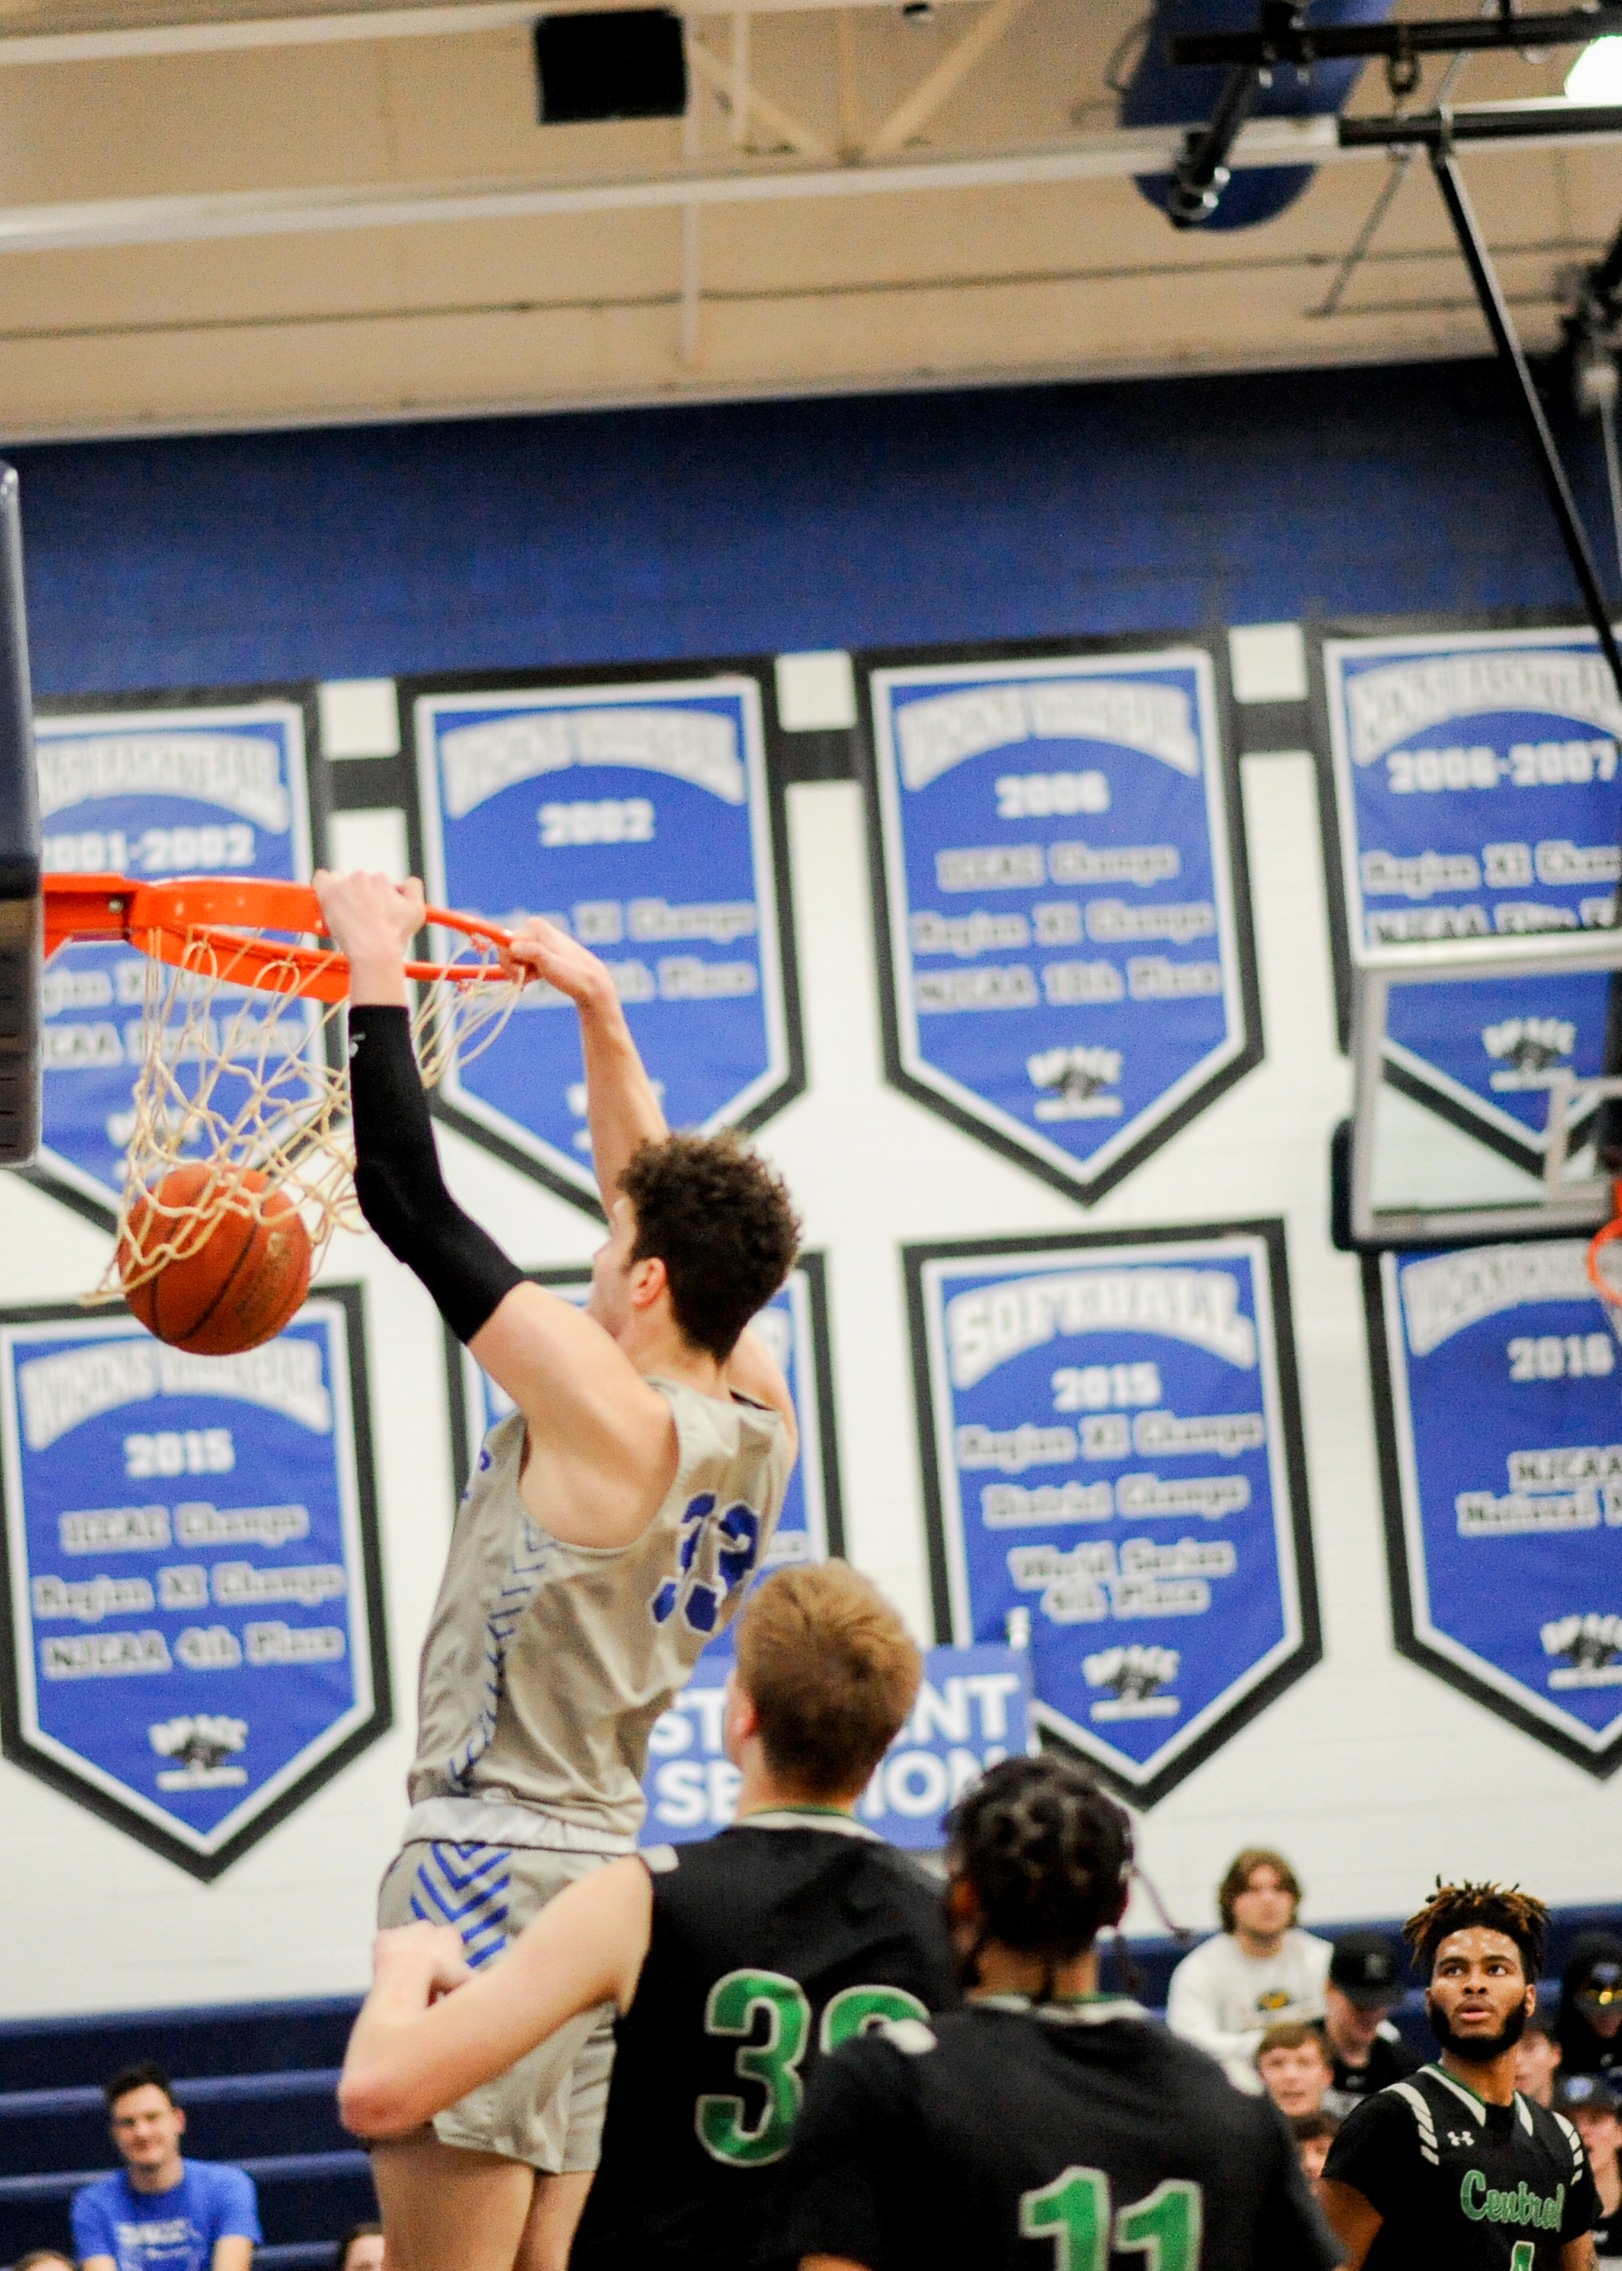 McGee's 29 points lead DMACC men's basketball team past Central (Neb.), 89-58